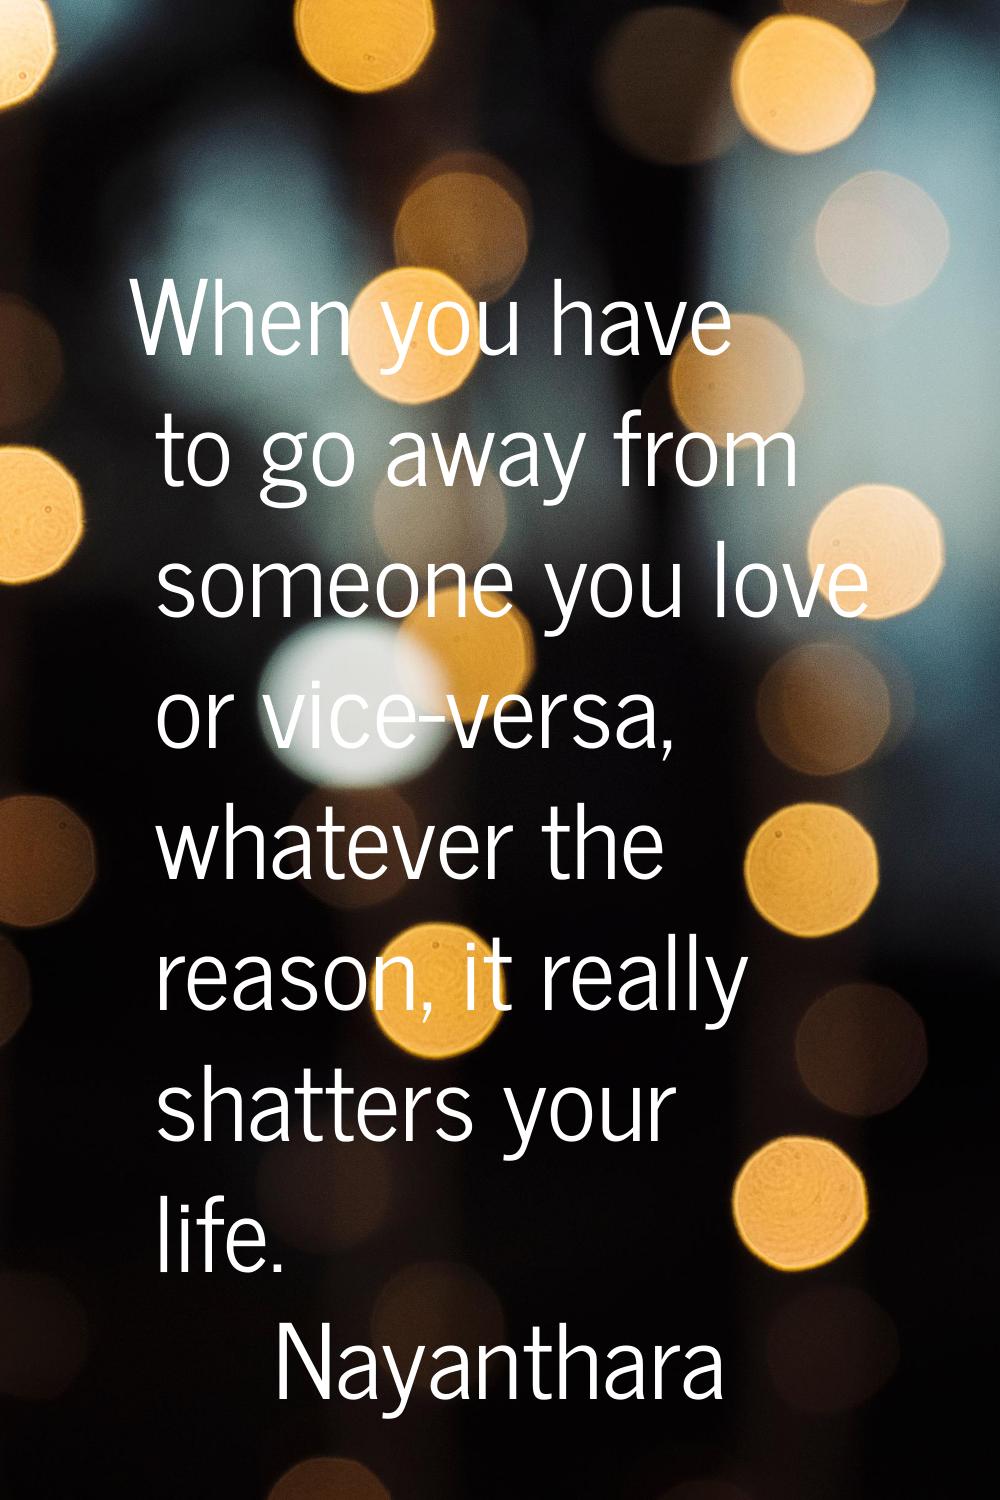 When you have to go away from someone you love or vice-versa, whatever the reason, it really shatte